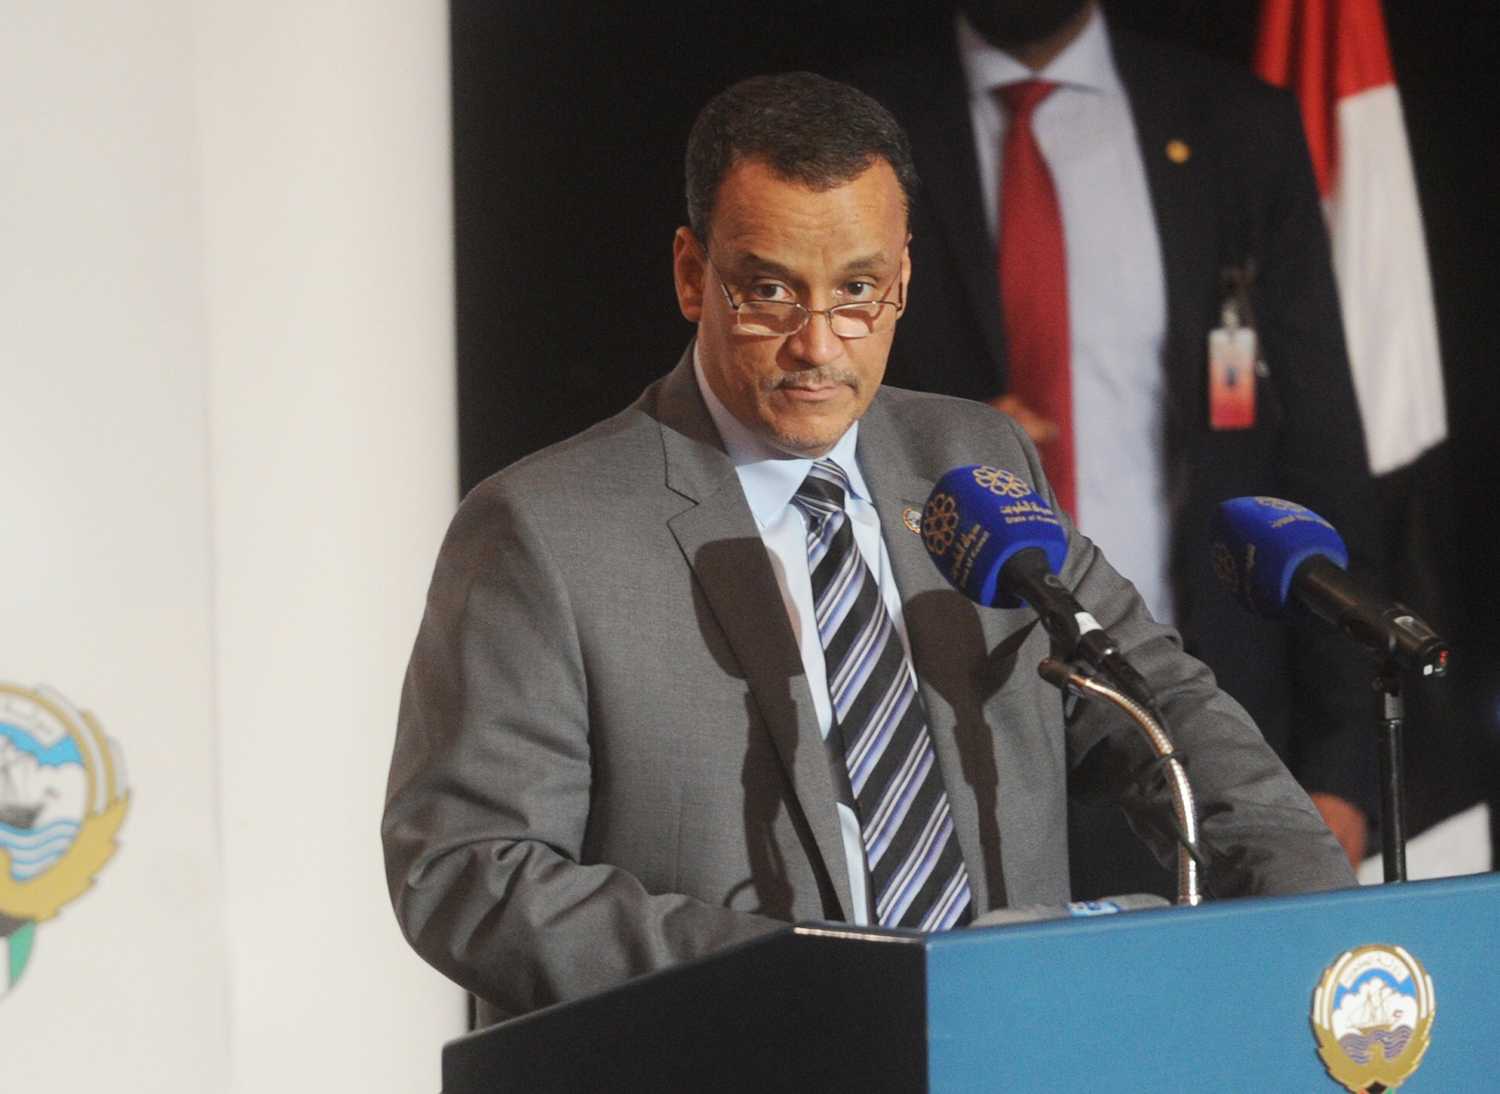 The UN Special Envoy to Yemen Ismail Ould Cheikh Ahmed